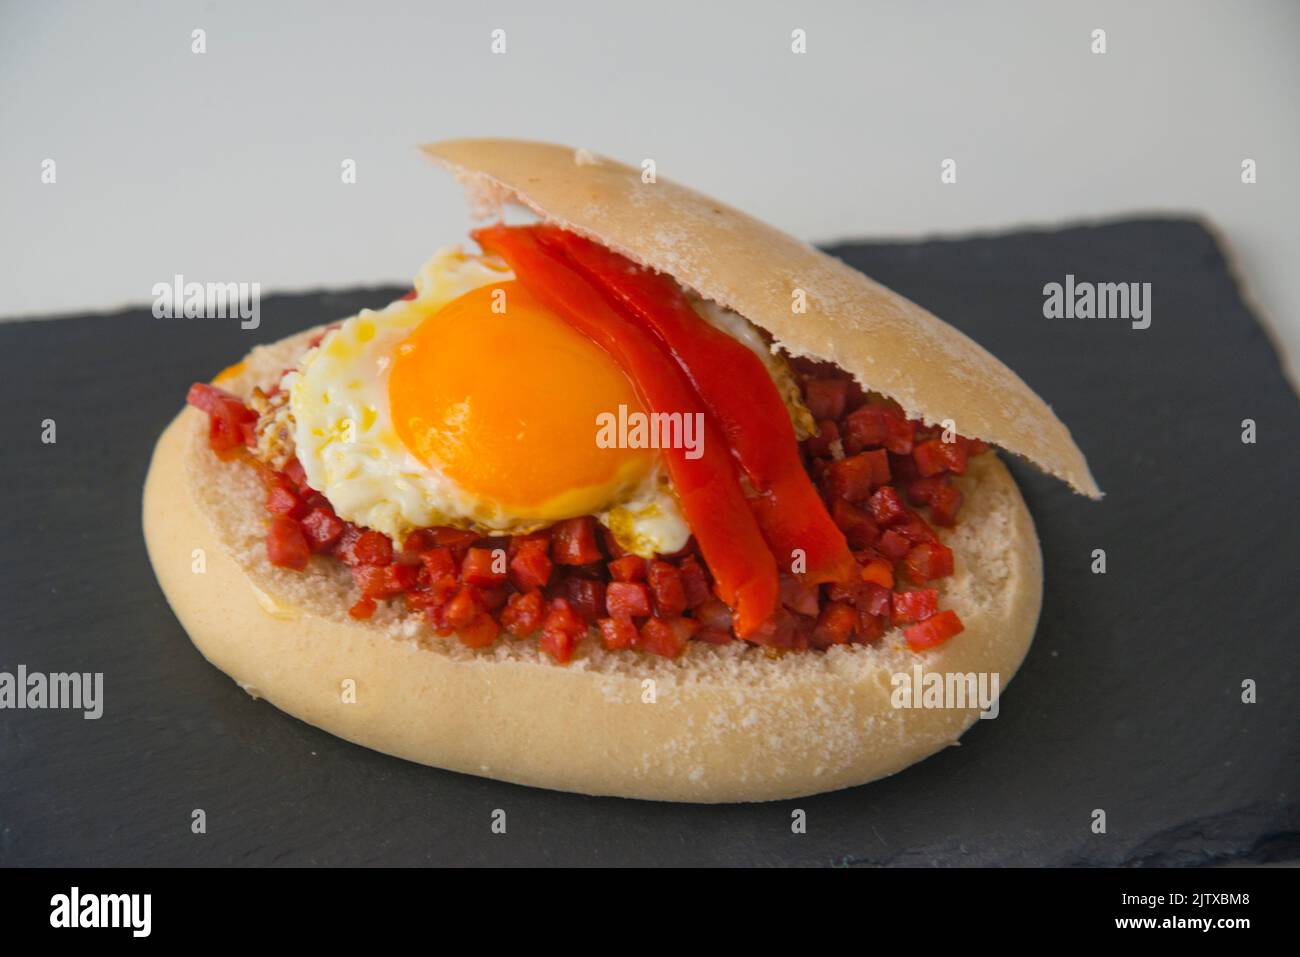 Tapa made of fried egg, picadillo and red pepper in bread. Spain. Stock Photo